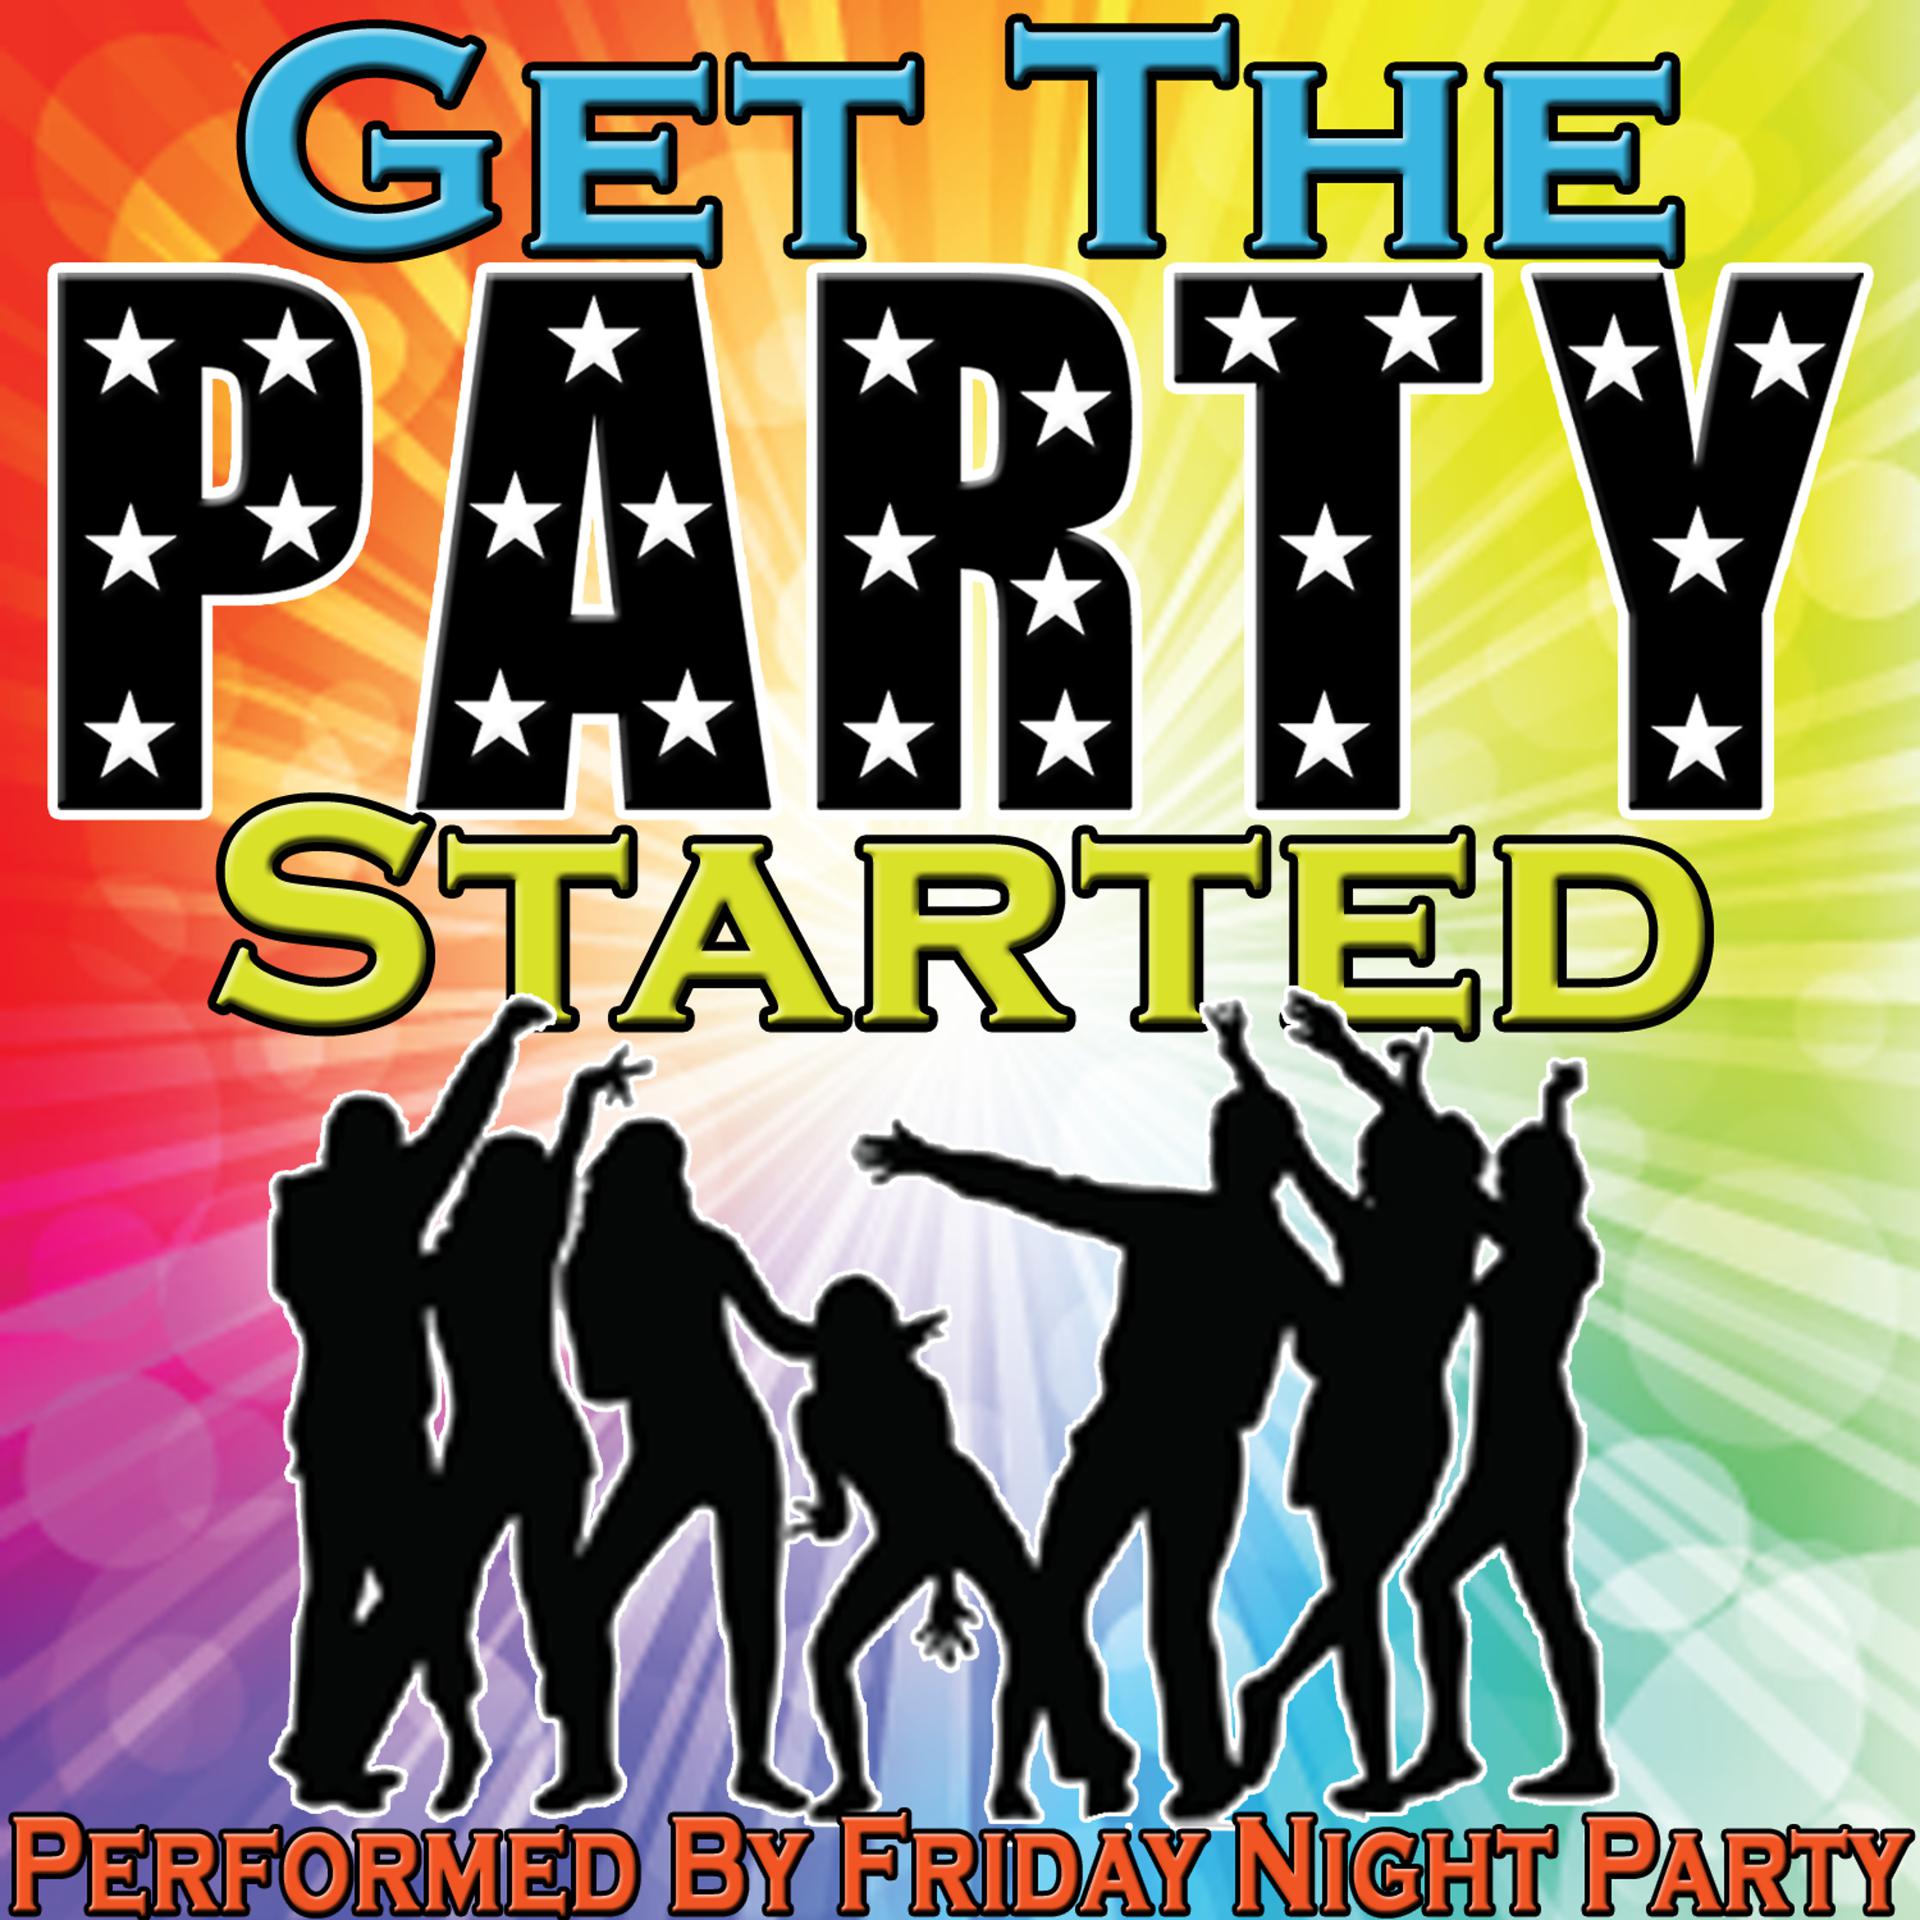 Вечеринка start. Get the Party started текст. Песня start the Party. Get this party